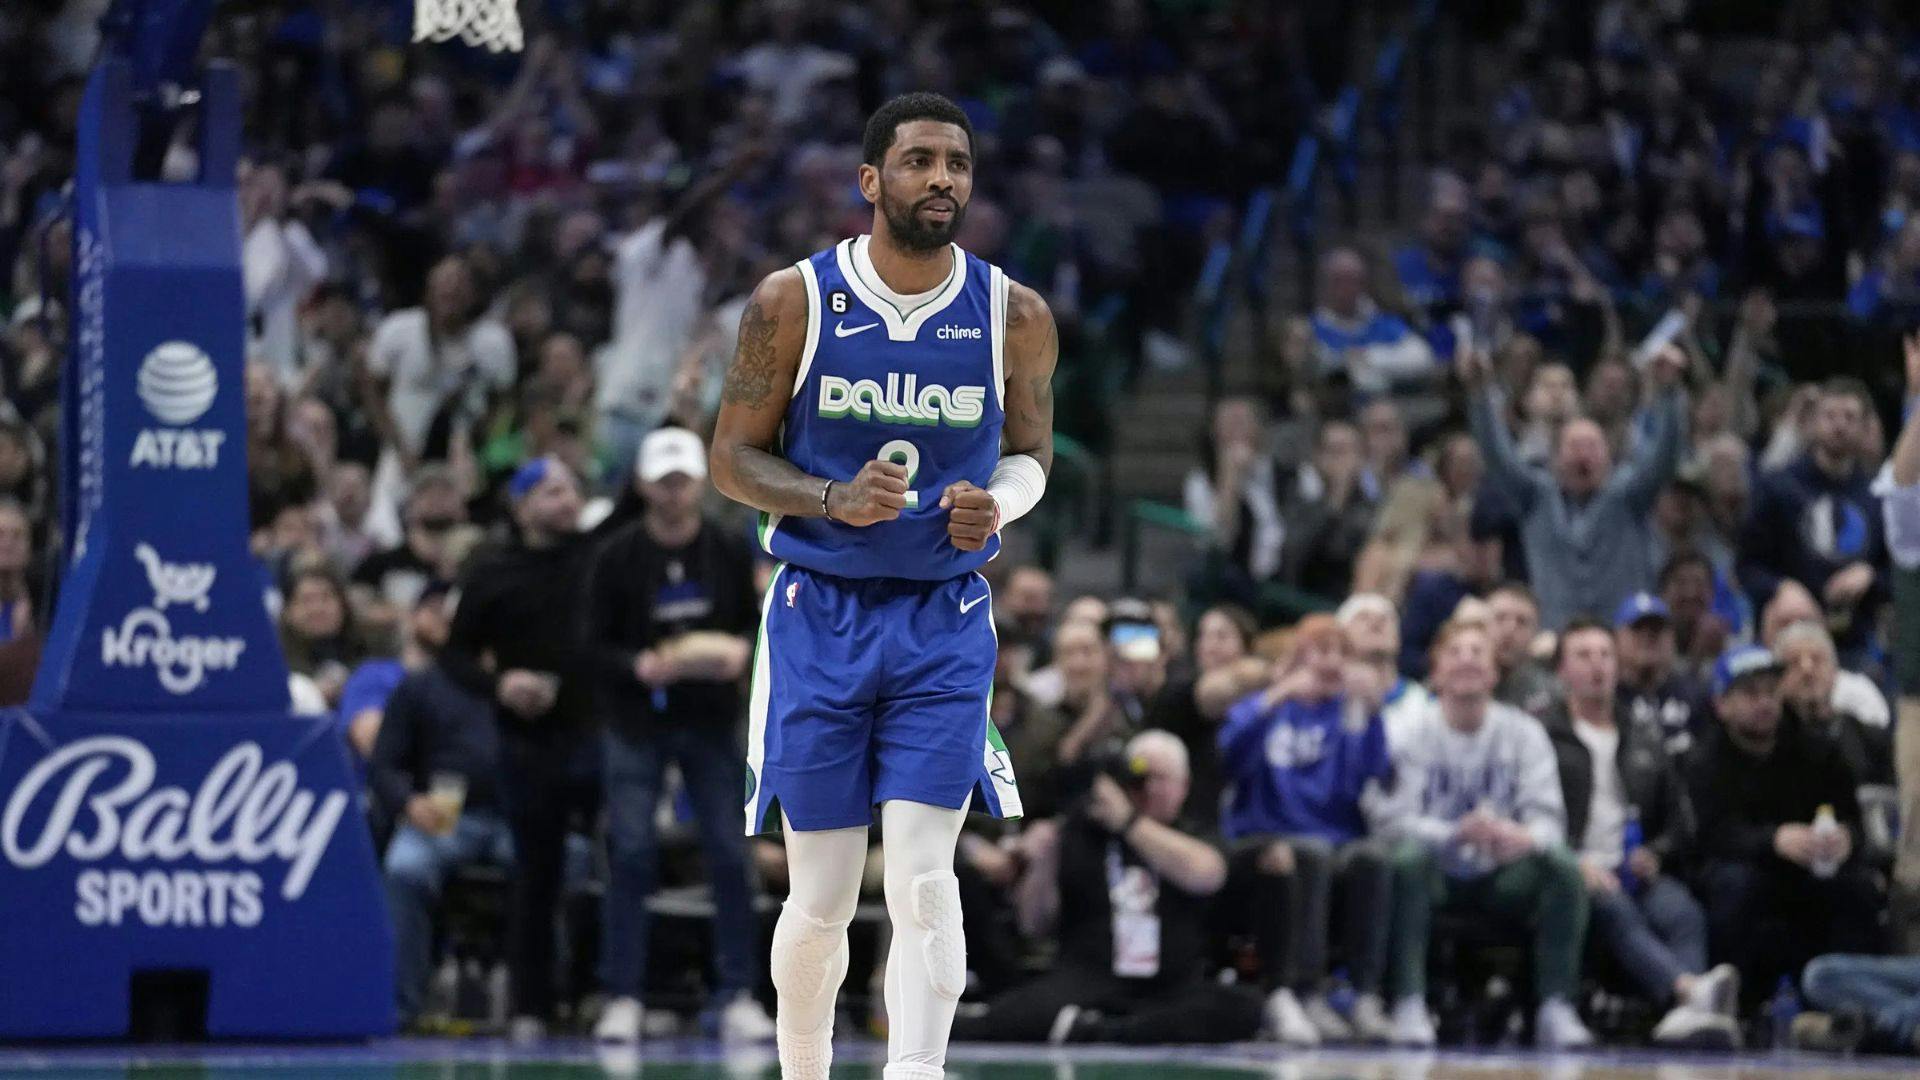 Kyrie Irving keeps it real with fans over impending NBA free agency